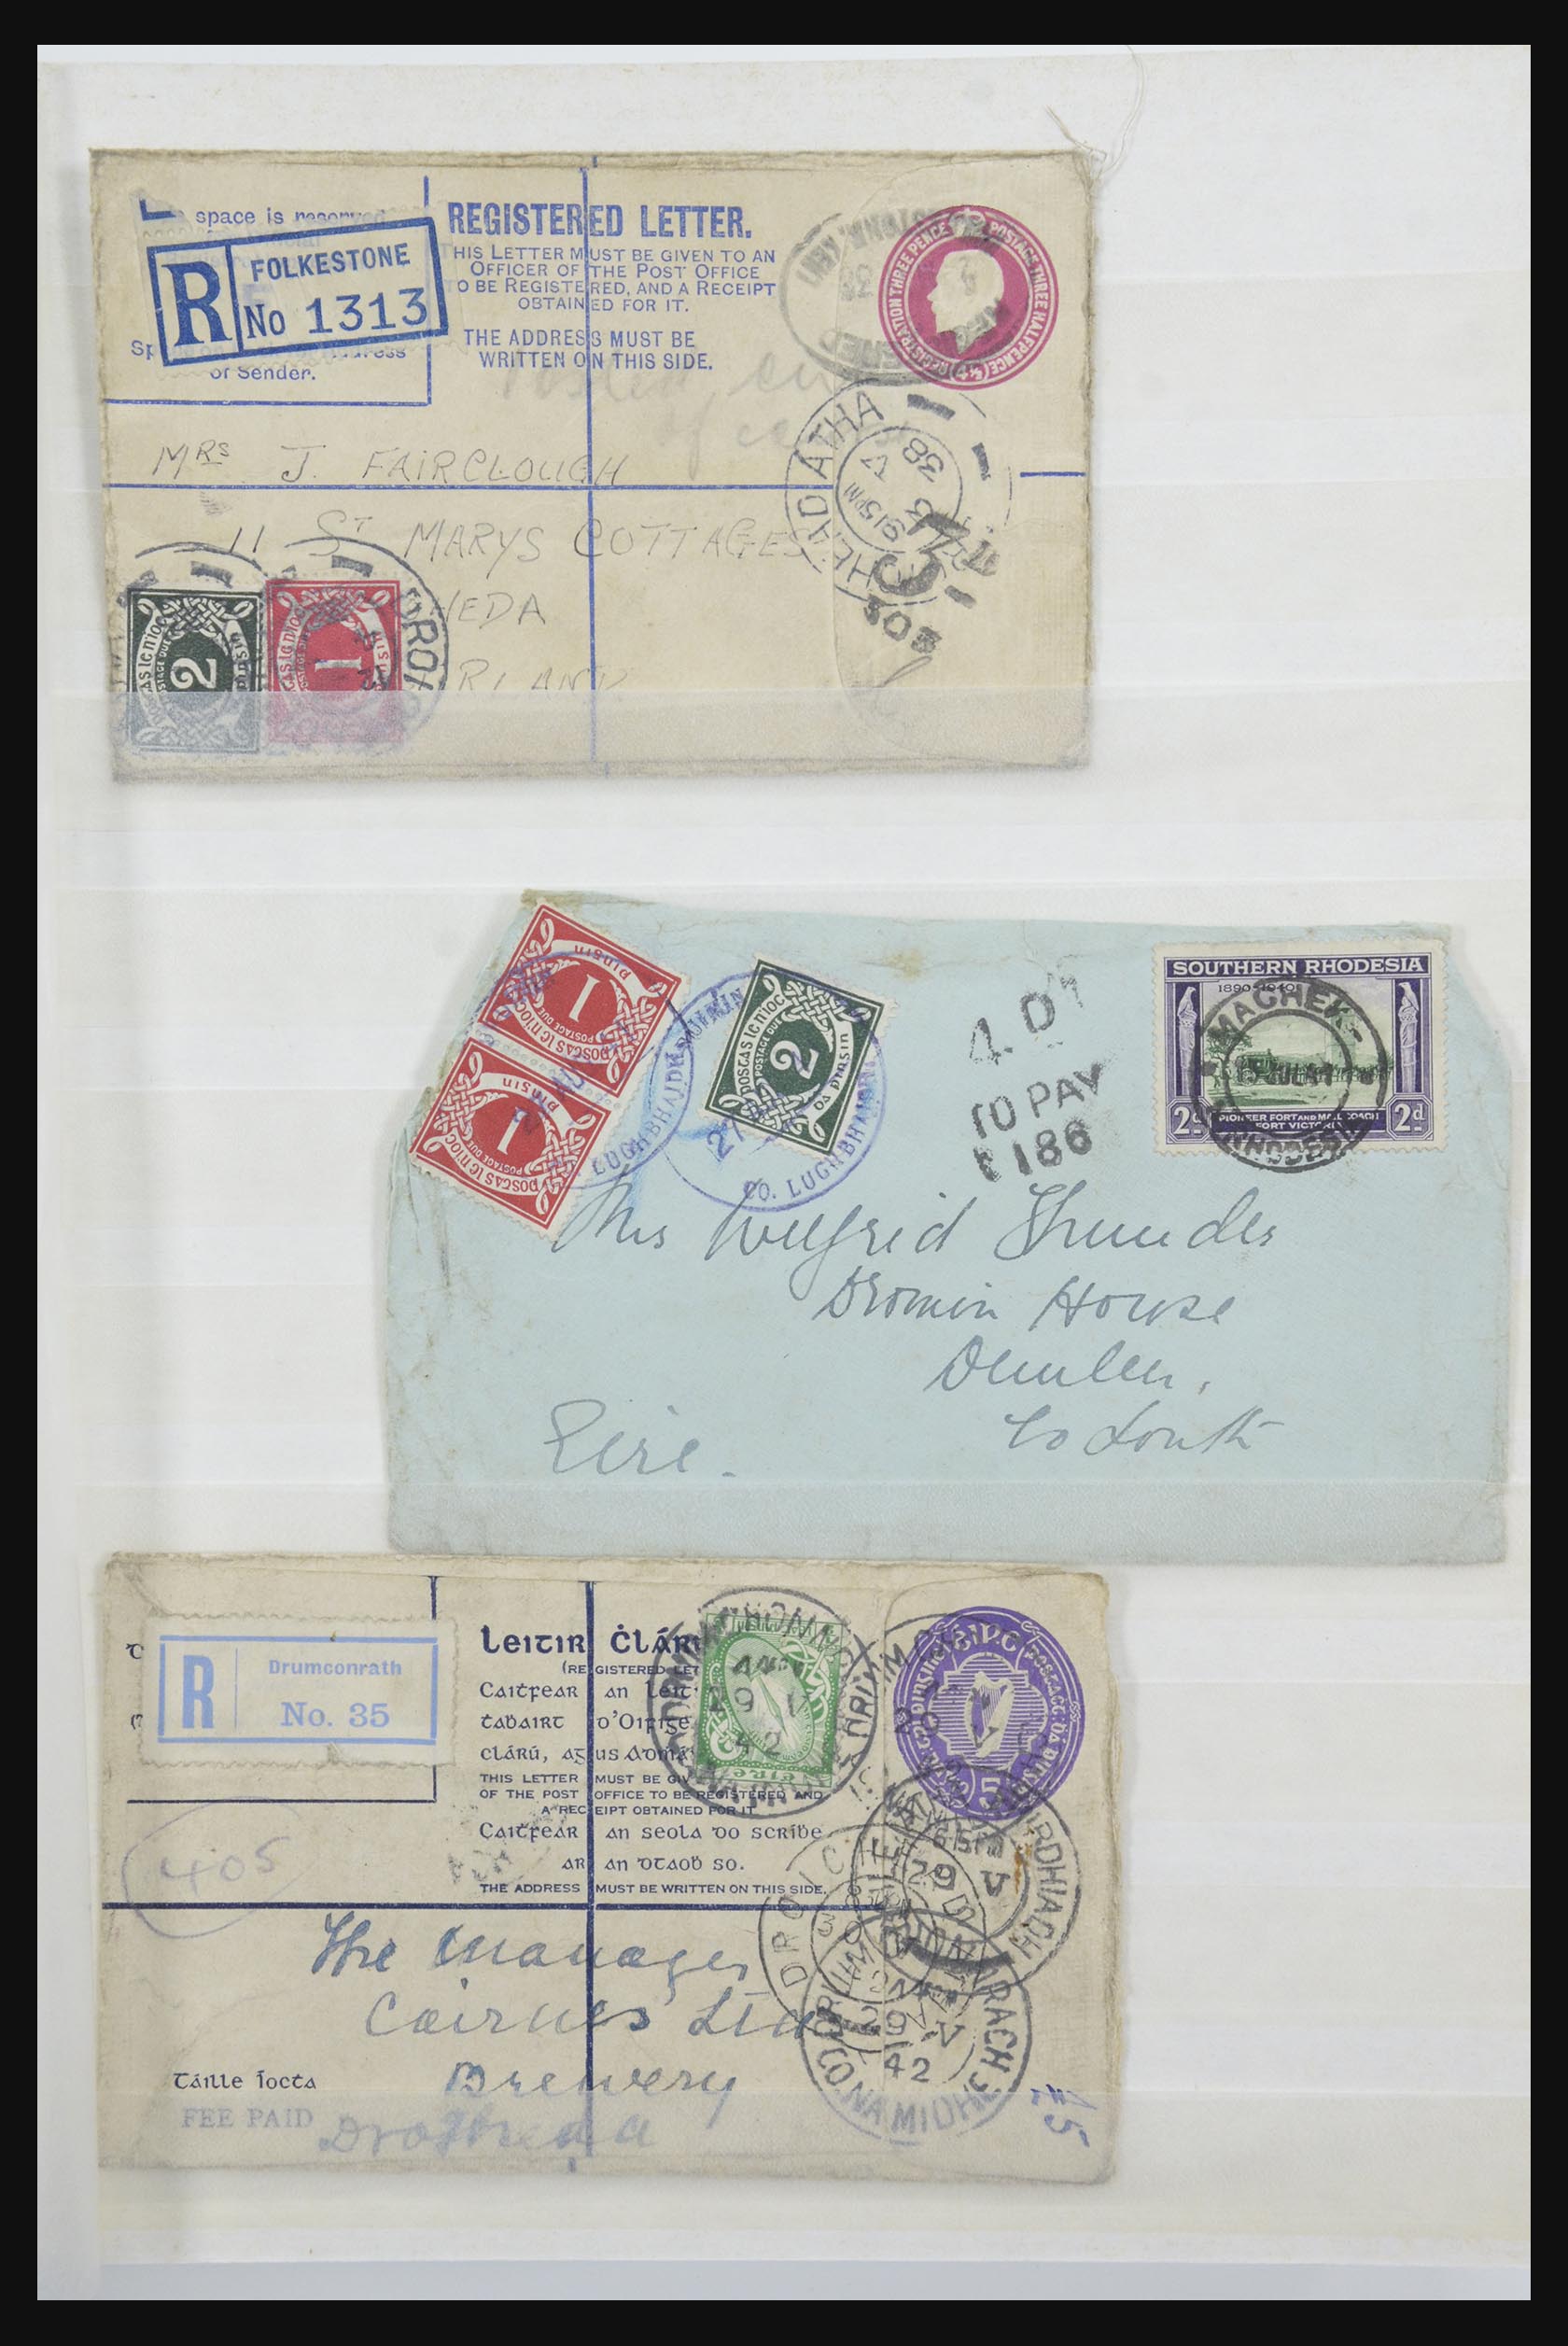 31579 005 - 31579 Ireland covers and FDC's 1860-1975.